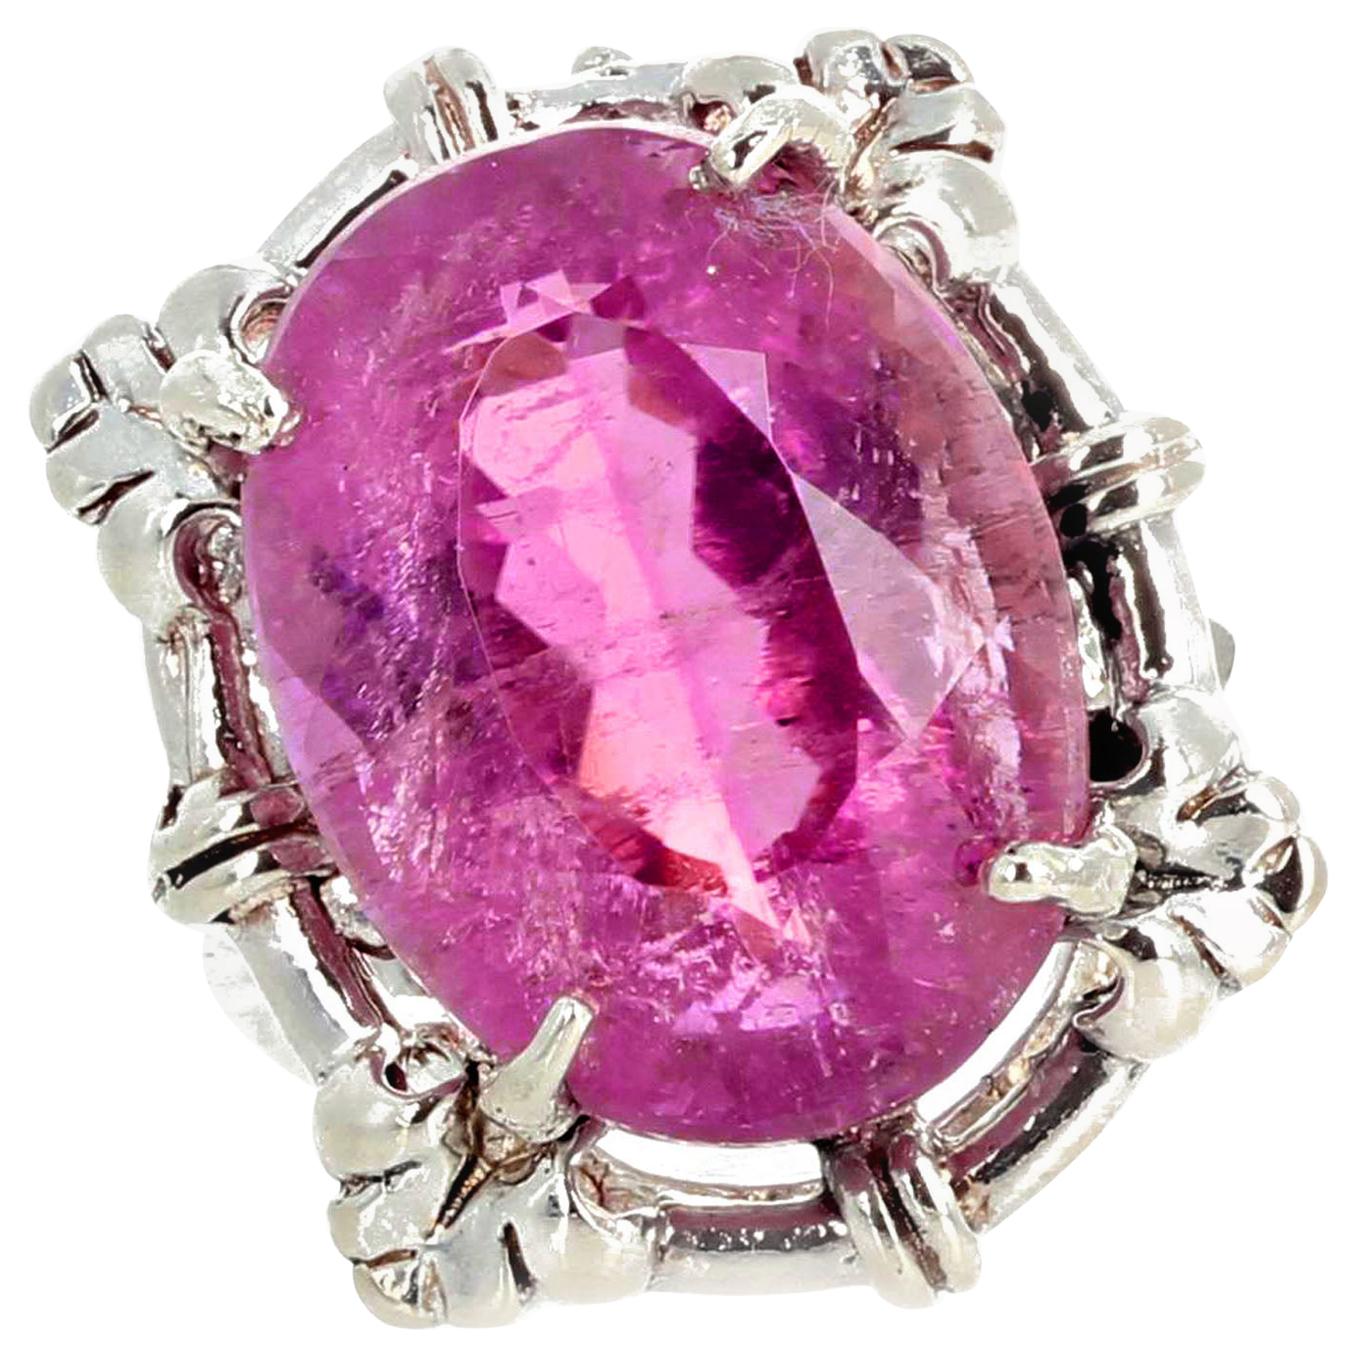 AJD Stunningly Magnificent 11.6 Carats Natural Brilliant Kunzite Cocktail Ring